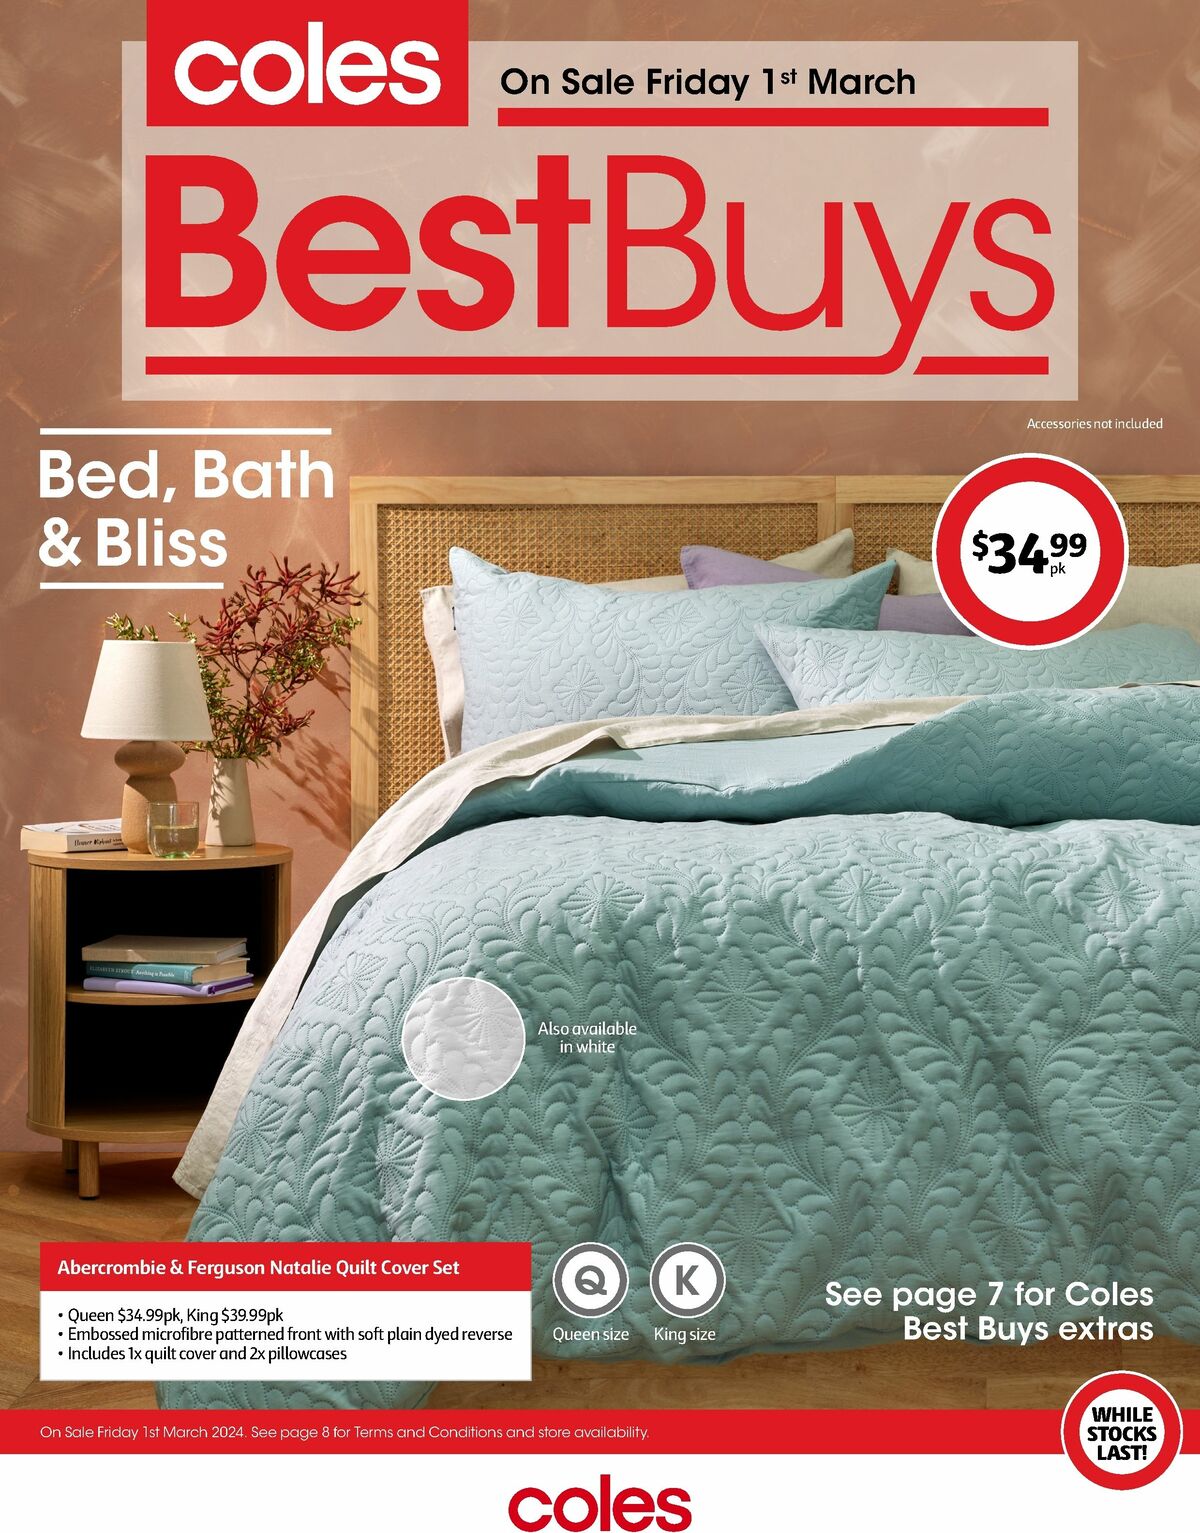 Coles Best Buys - Bed, Bath & Bliss Catalogues from 1 March